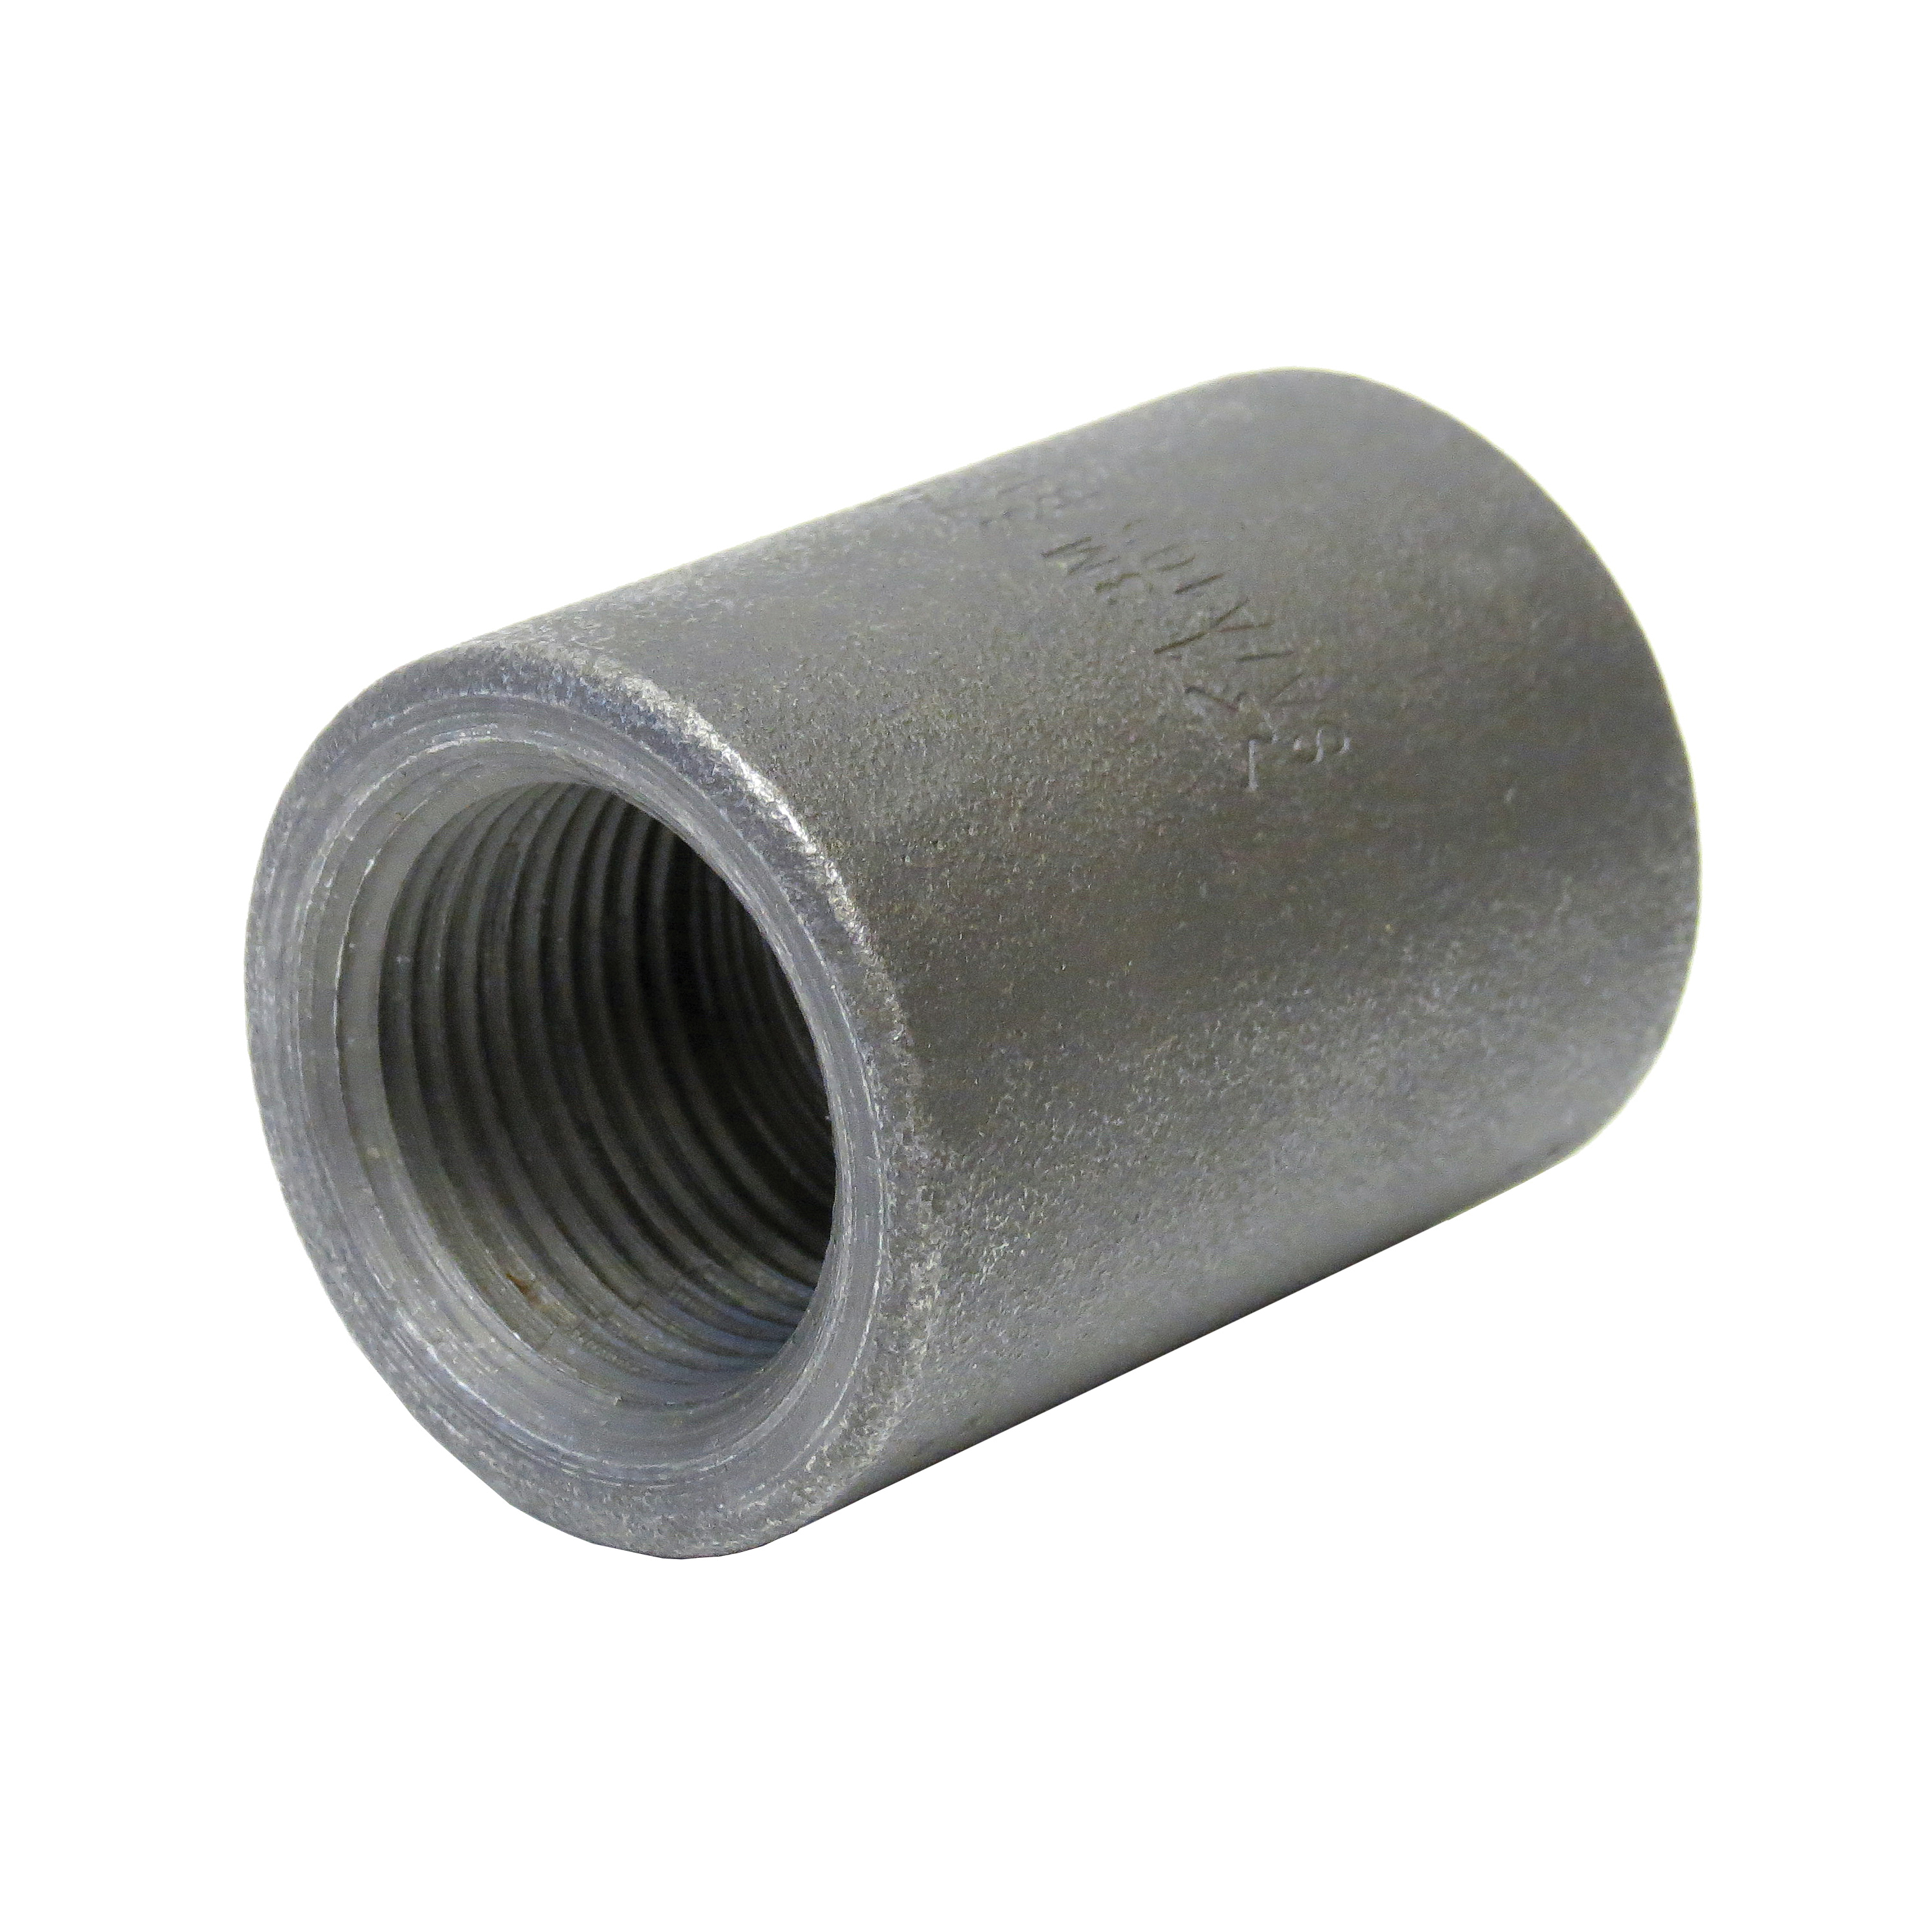 Anvil® 0361156201 FIG 2117 Pipe Coupling, 1-1/4 in Nominal, FNPT End Style, 3000 lb, Steel, Black Oxide, Domestic